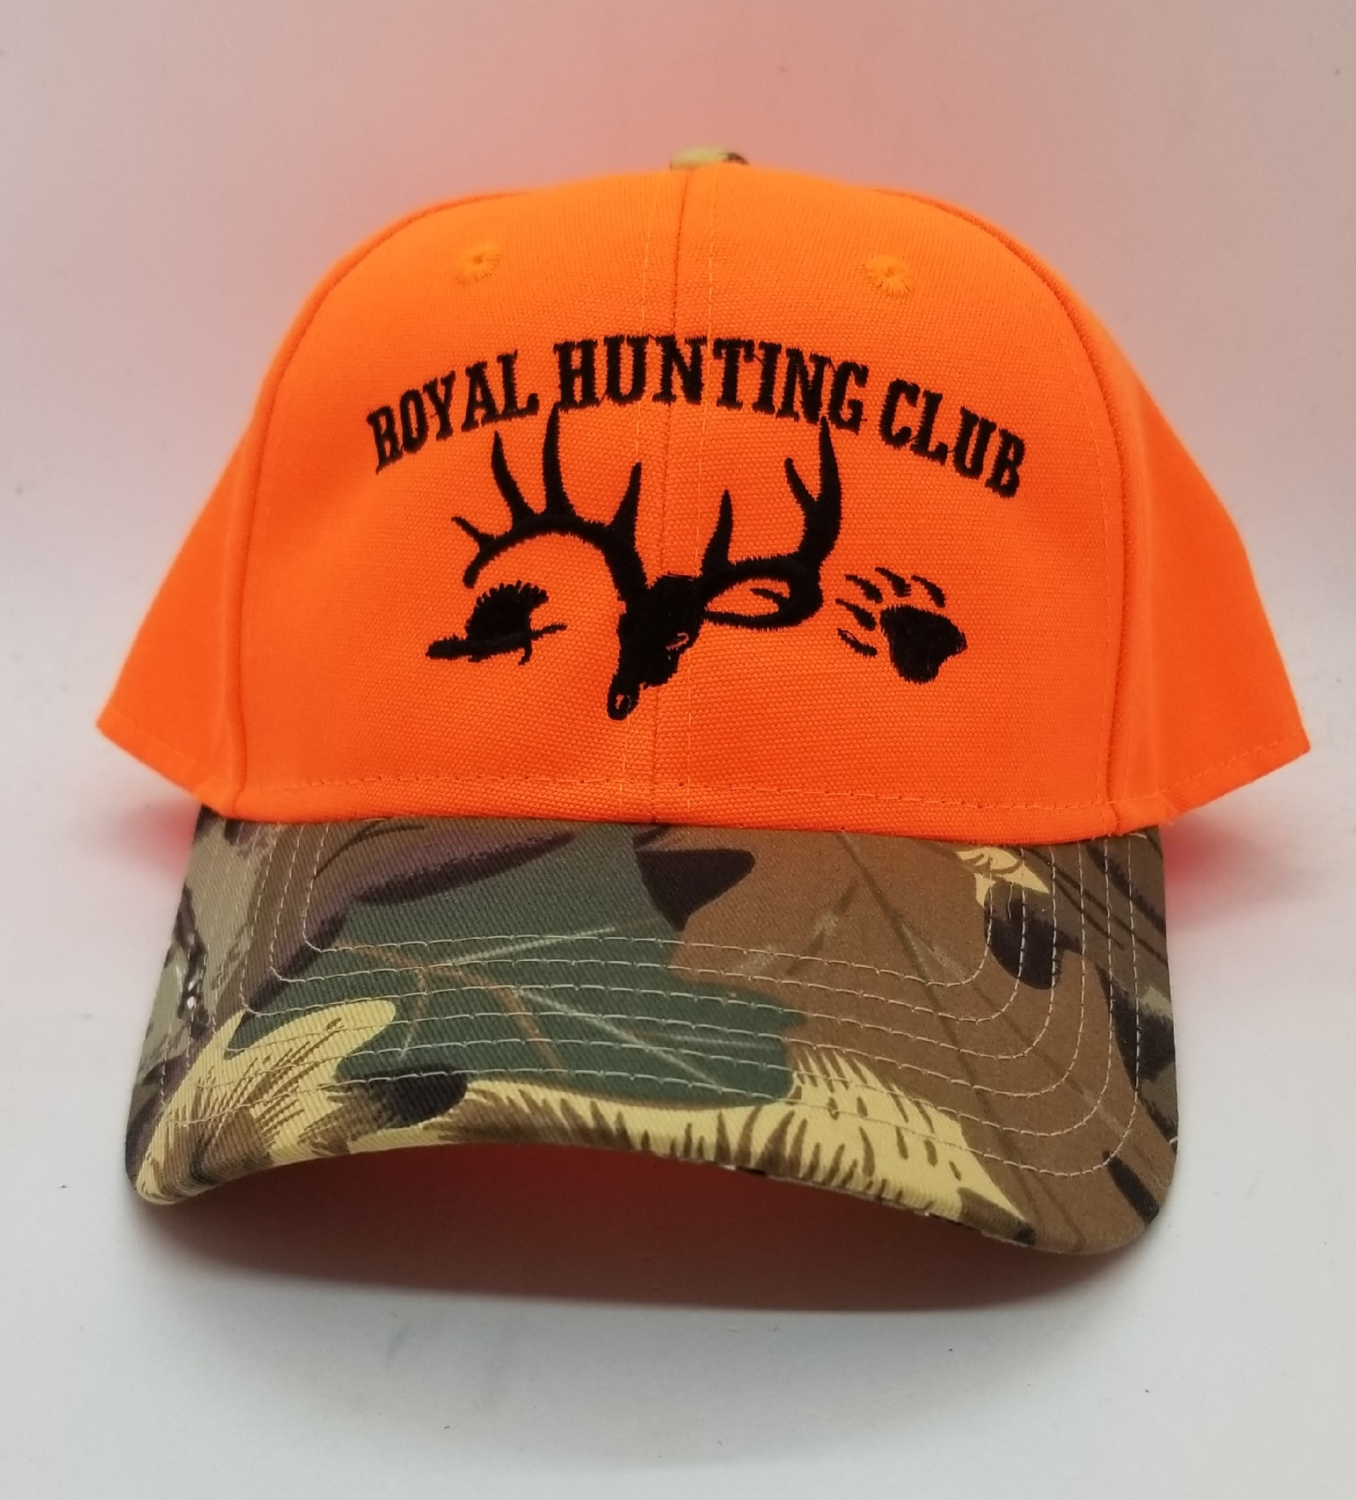 Wildlife Logo Adjustable Hat - Discount on orders of 12 or more!!